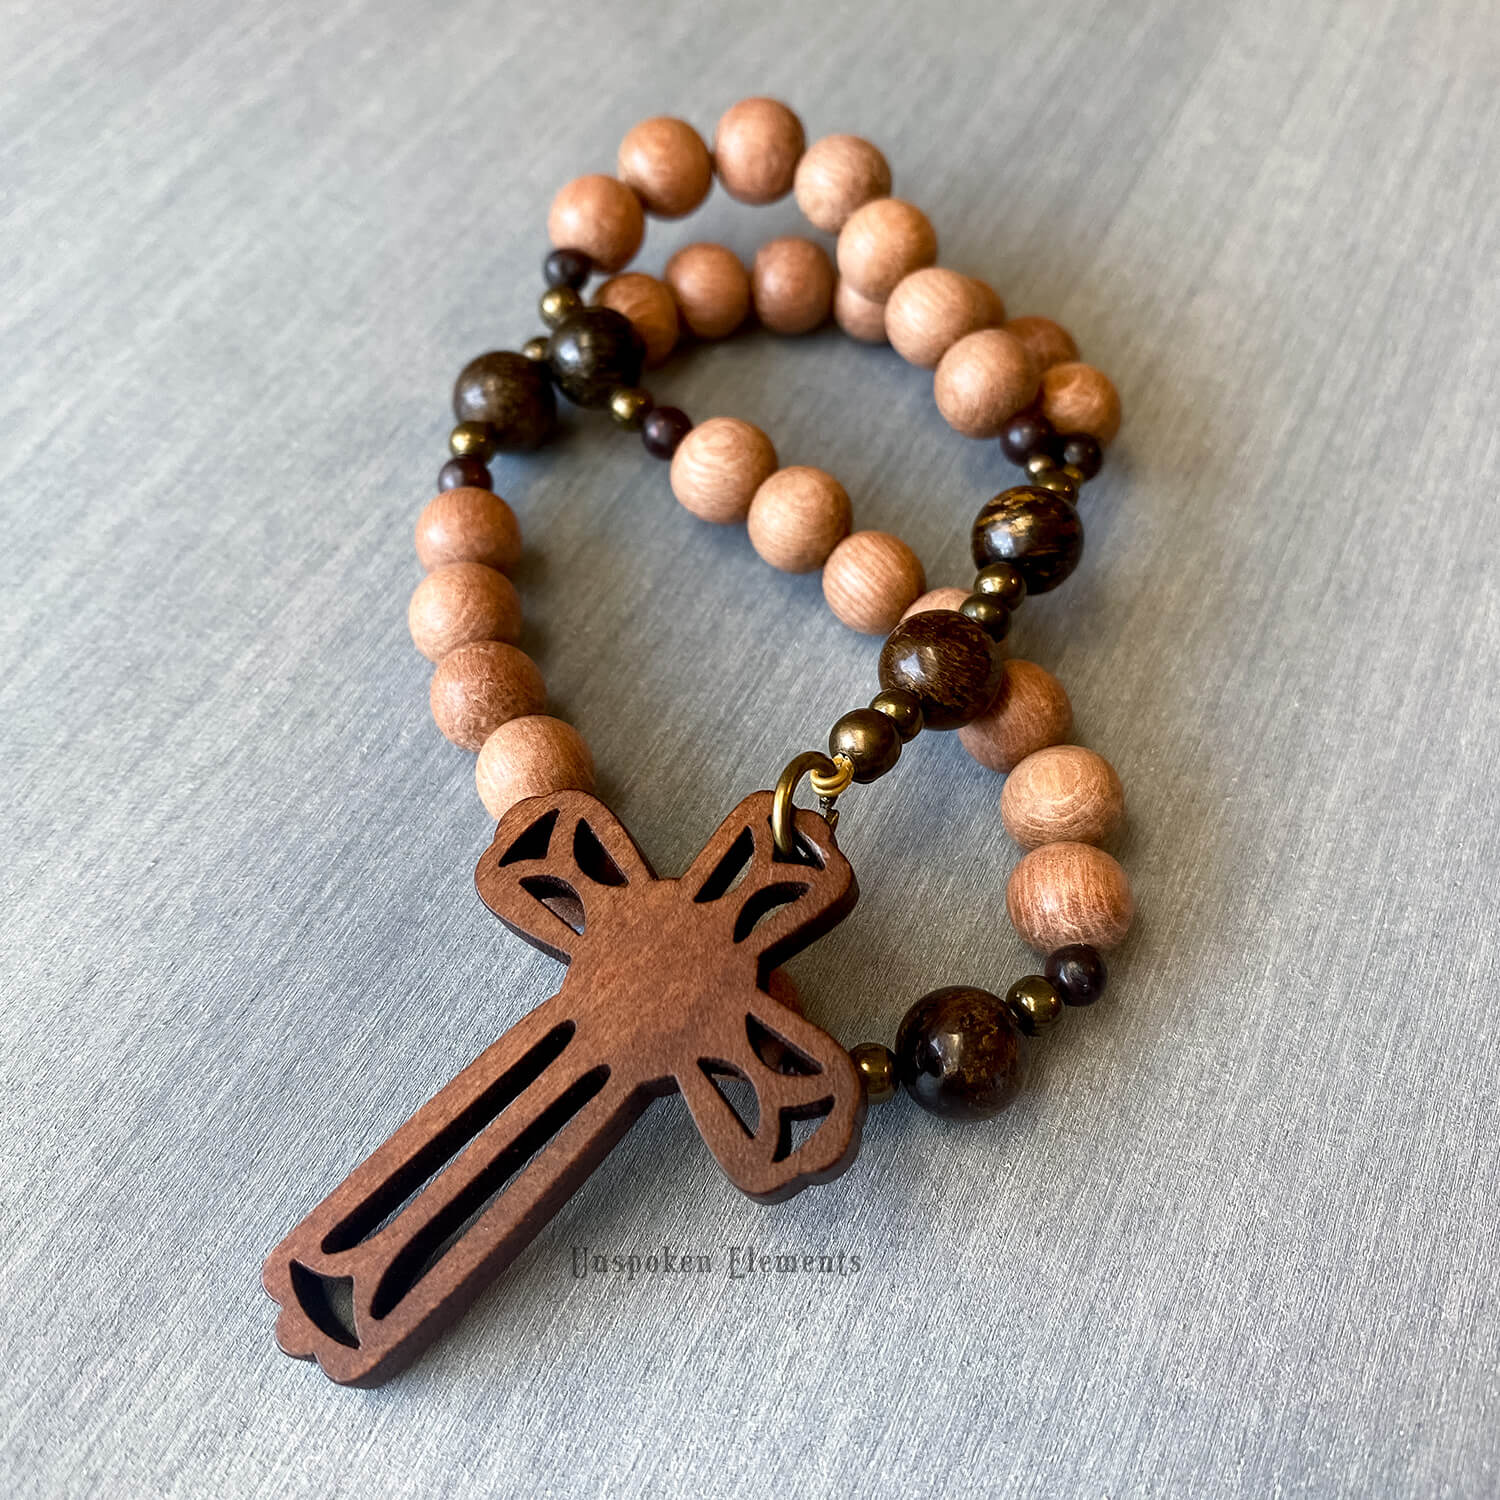 St Peter's Bookroom | Gifts | Rosary Beads